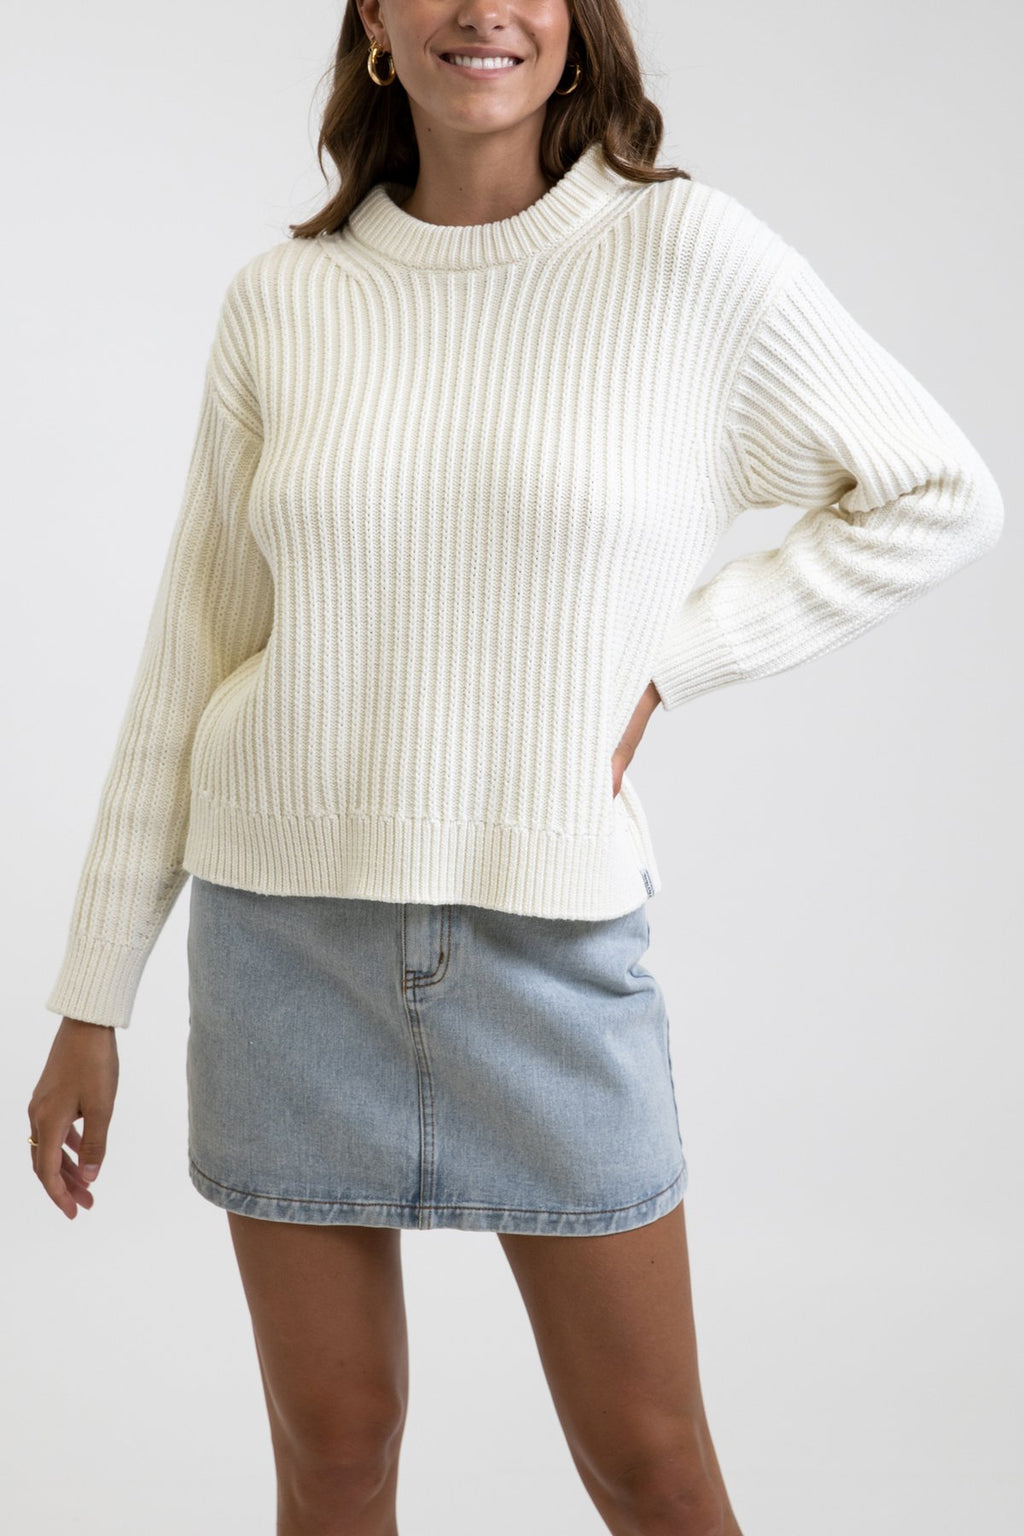 Classic Cable Knit Vintage White